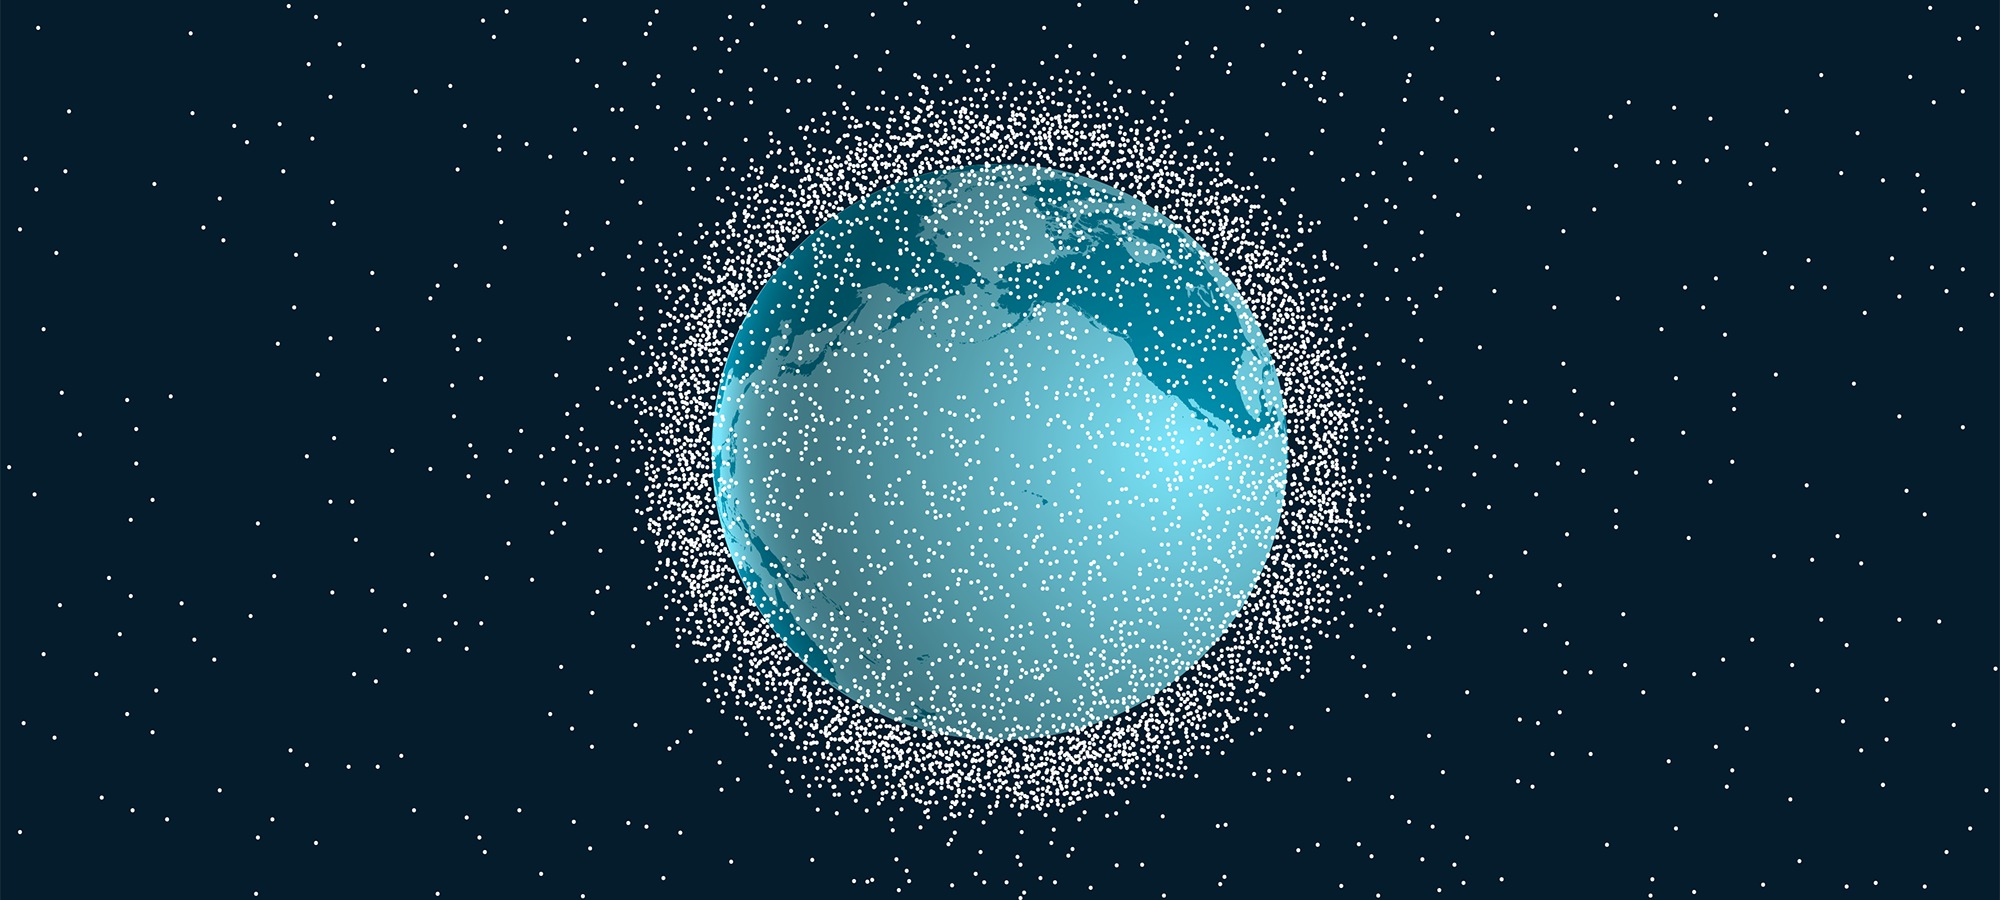 Space junk facts: Why space cleanup matters | McKinsey